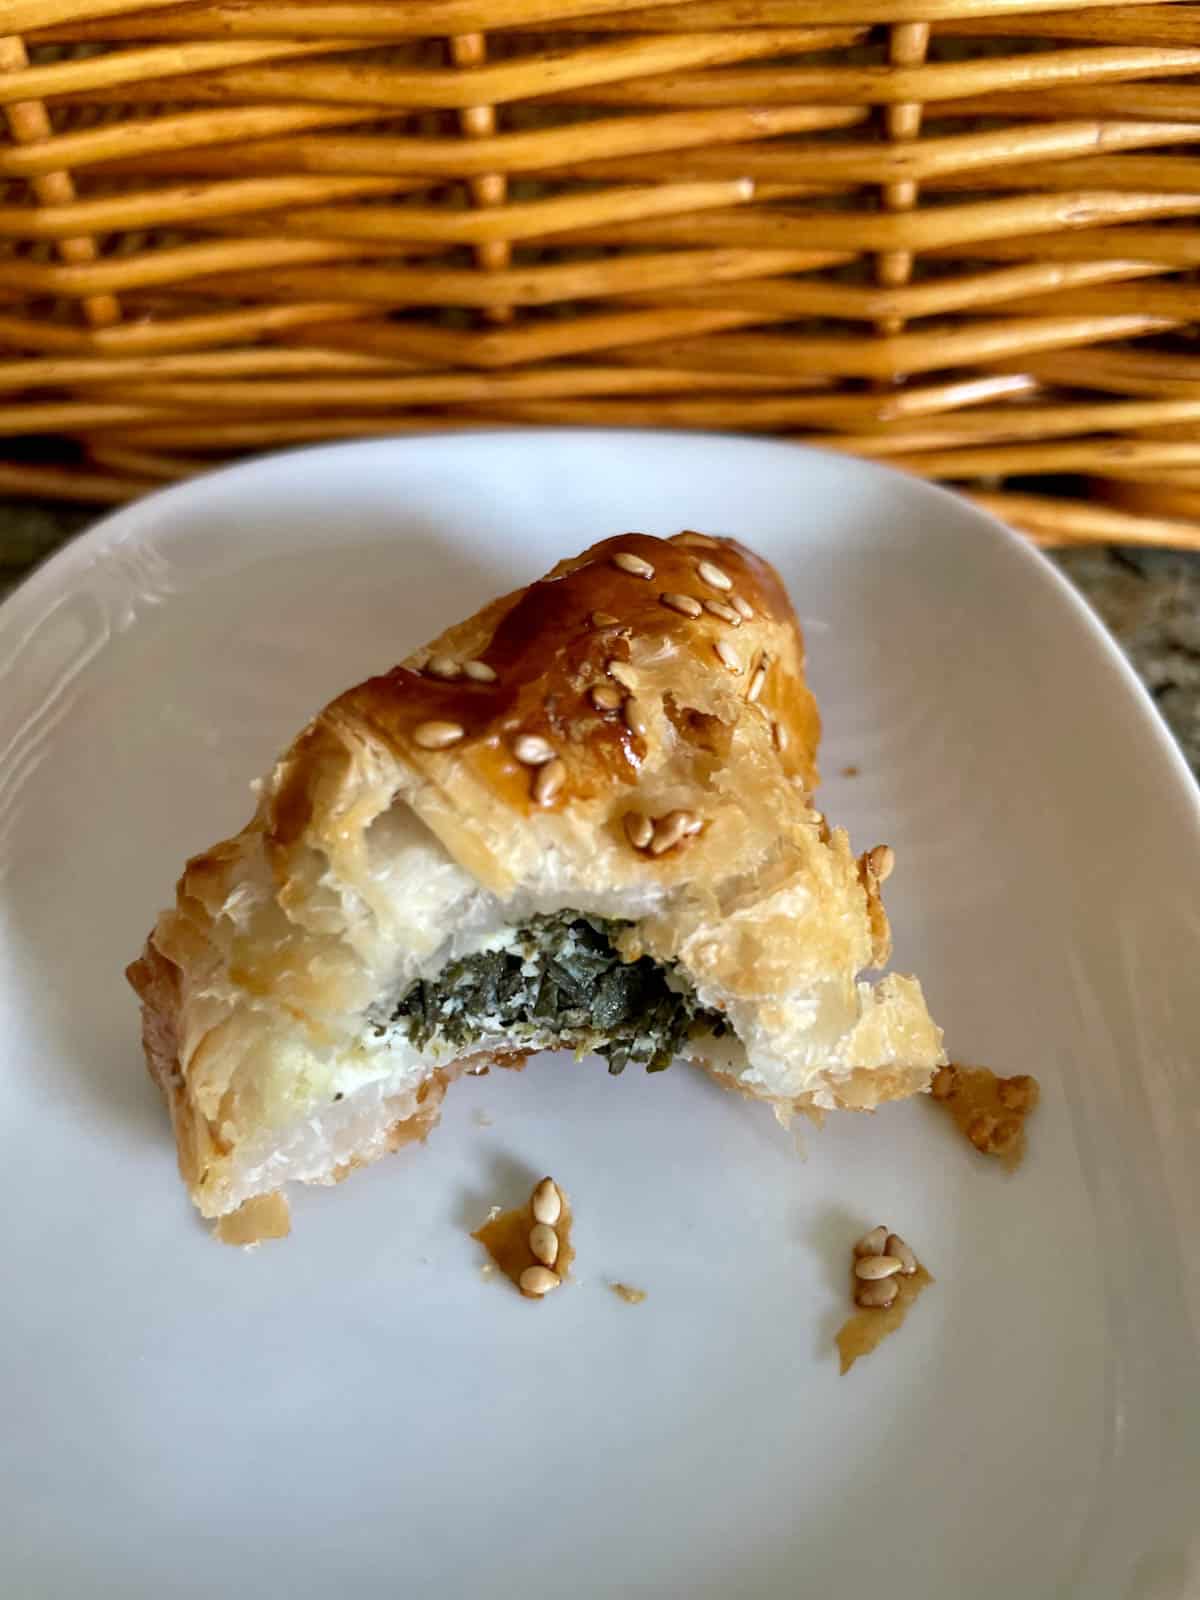 A spinach and feta boureka with a bite taken out showing the filling.